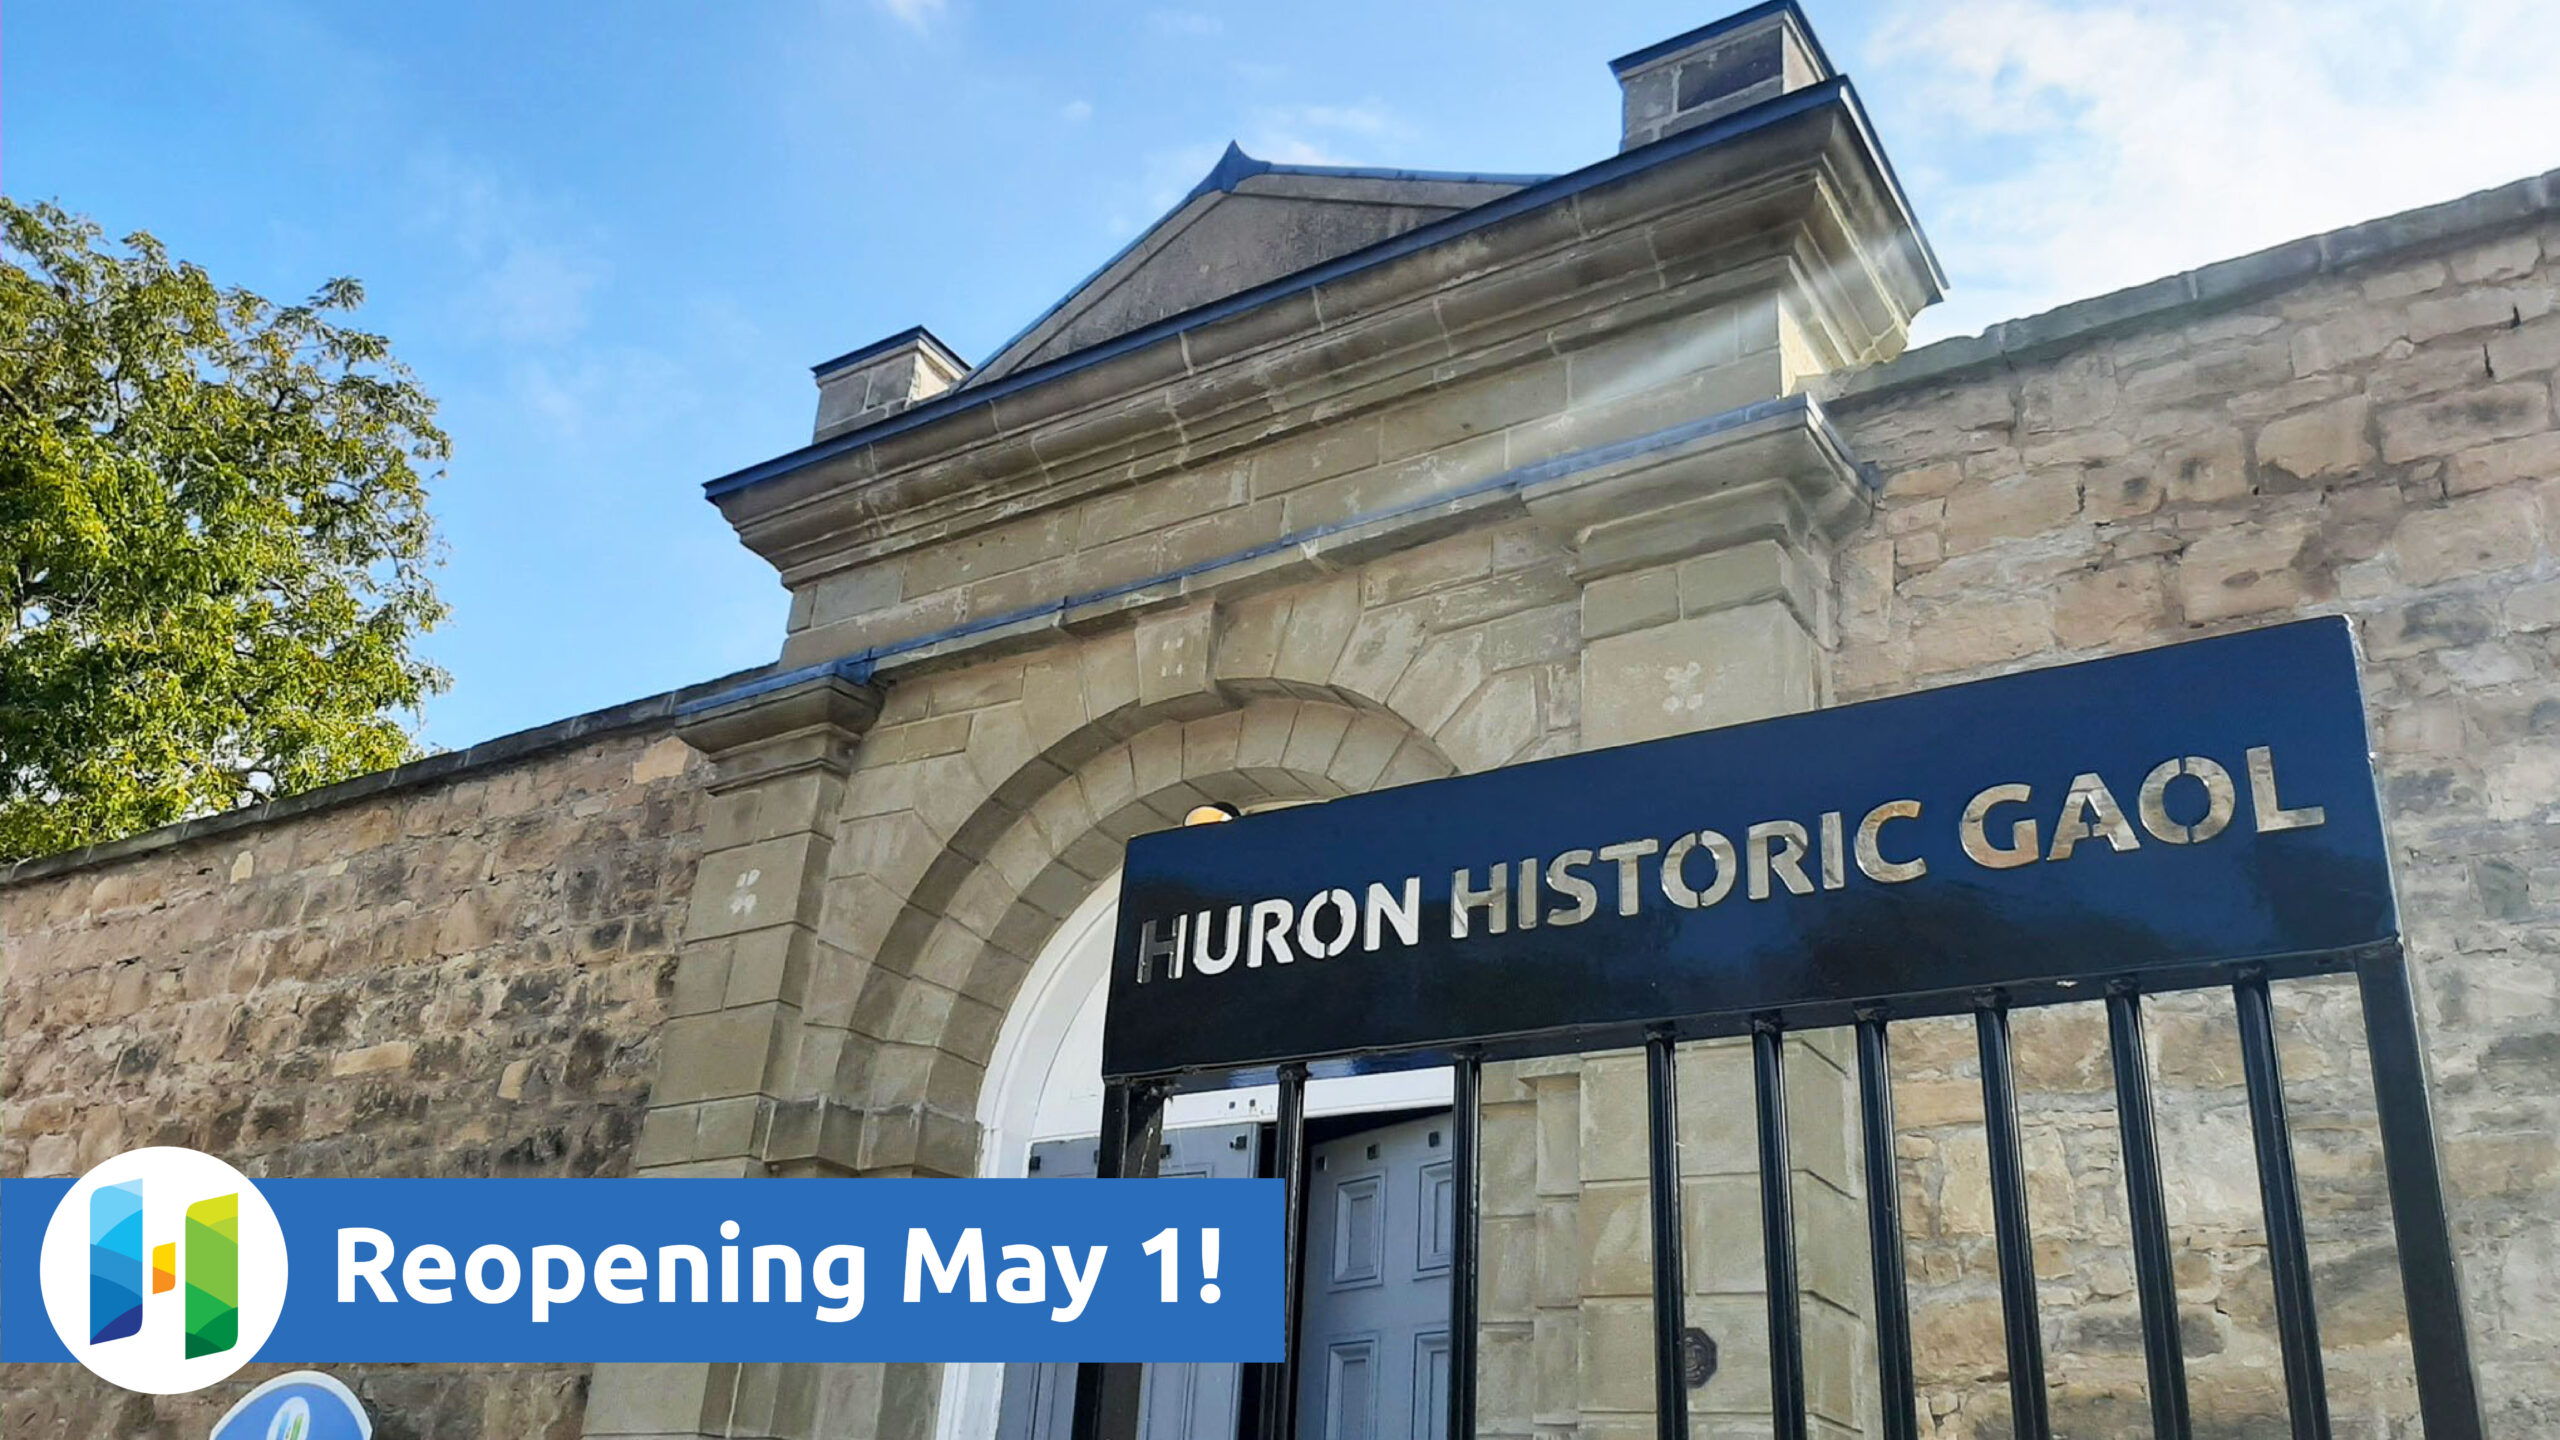 Photo of the Huron Historic Gaol with text promoting reopening May 1